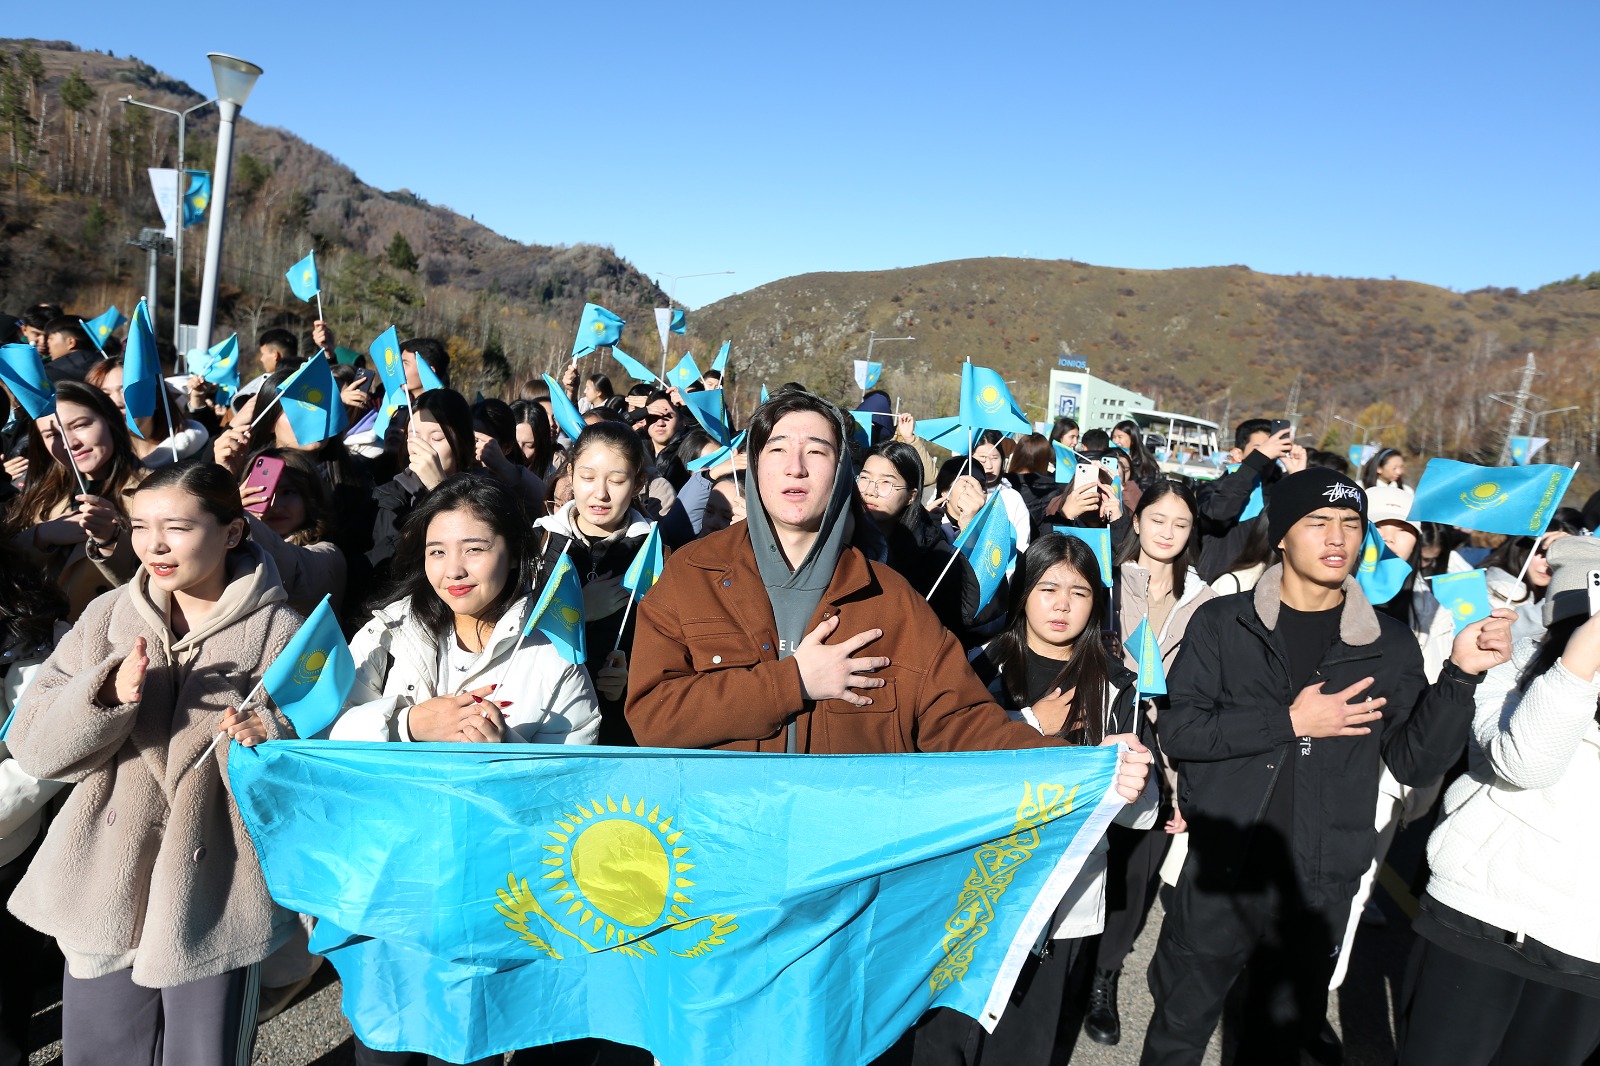 Kazakhstanъs population has reached 20 million and is going through changes